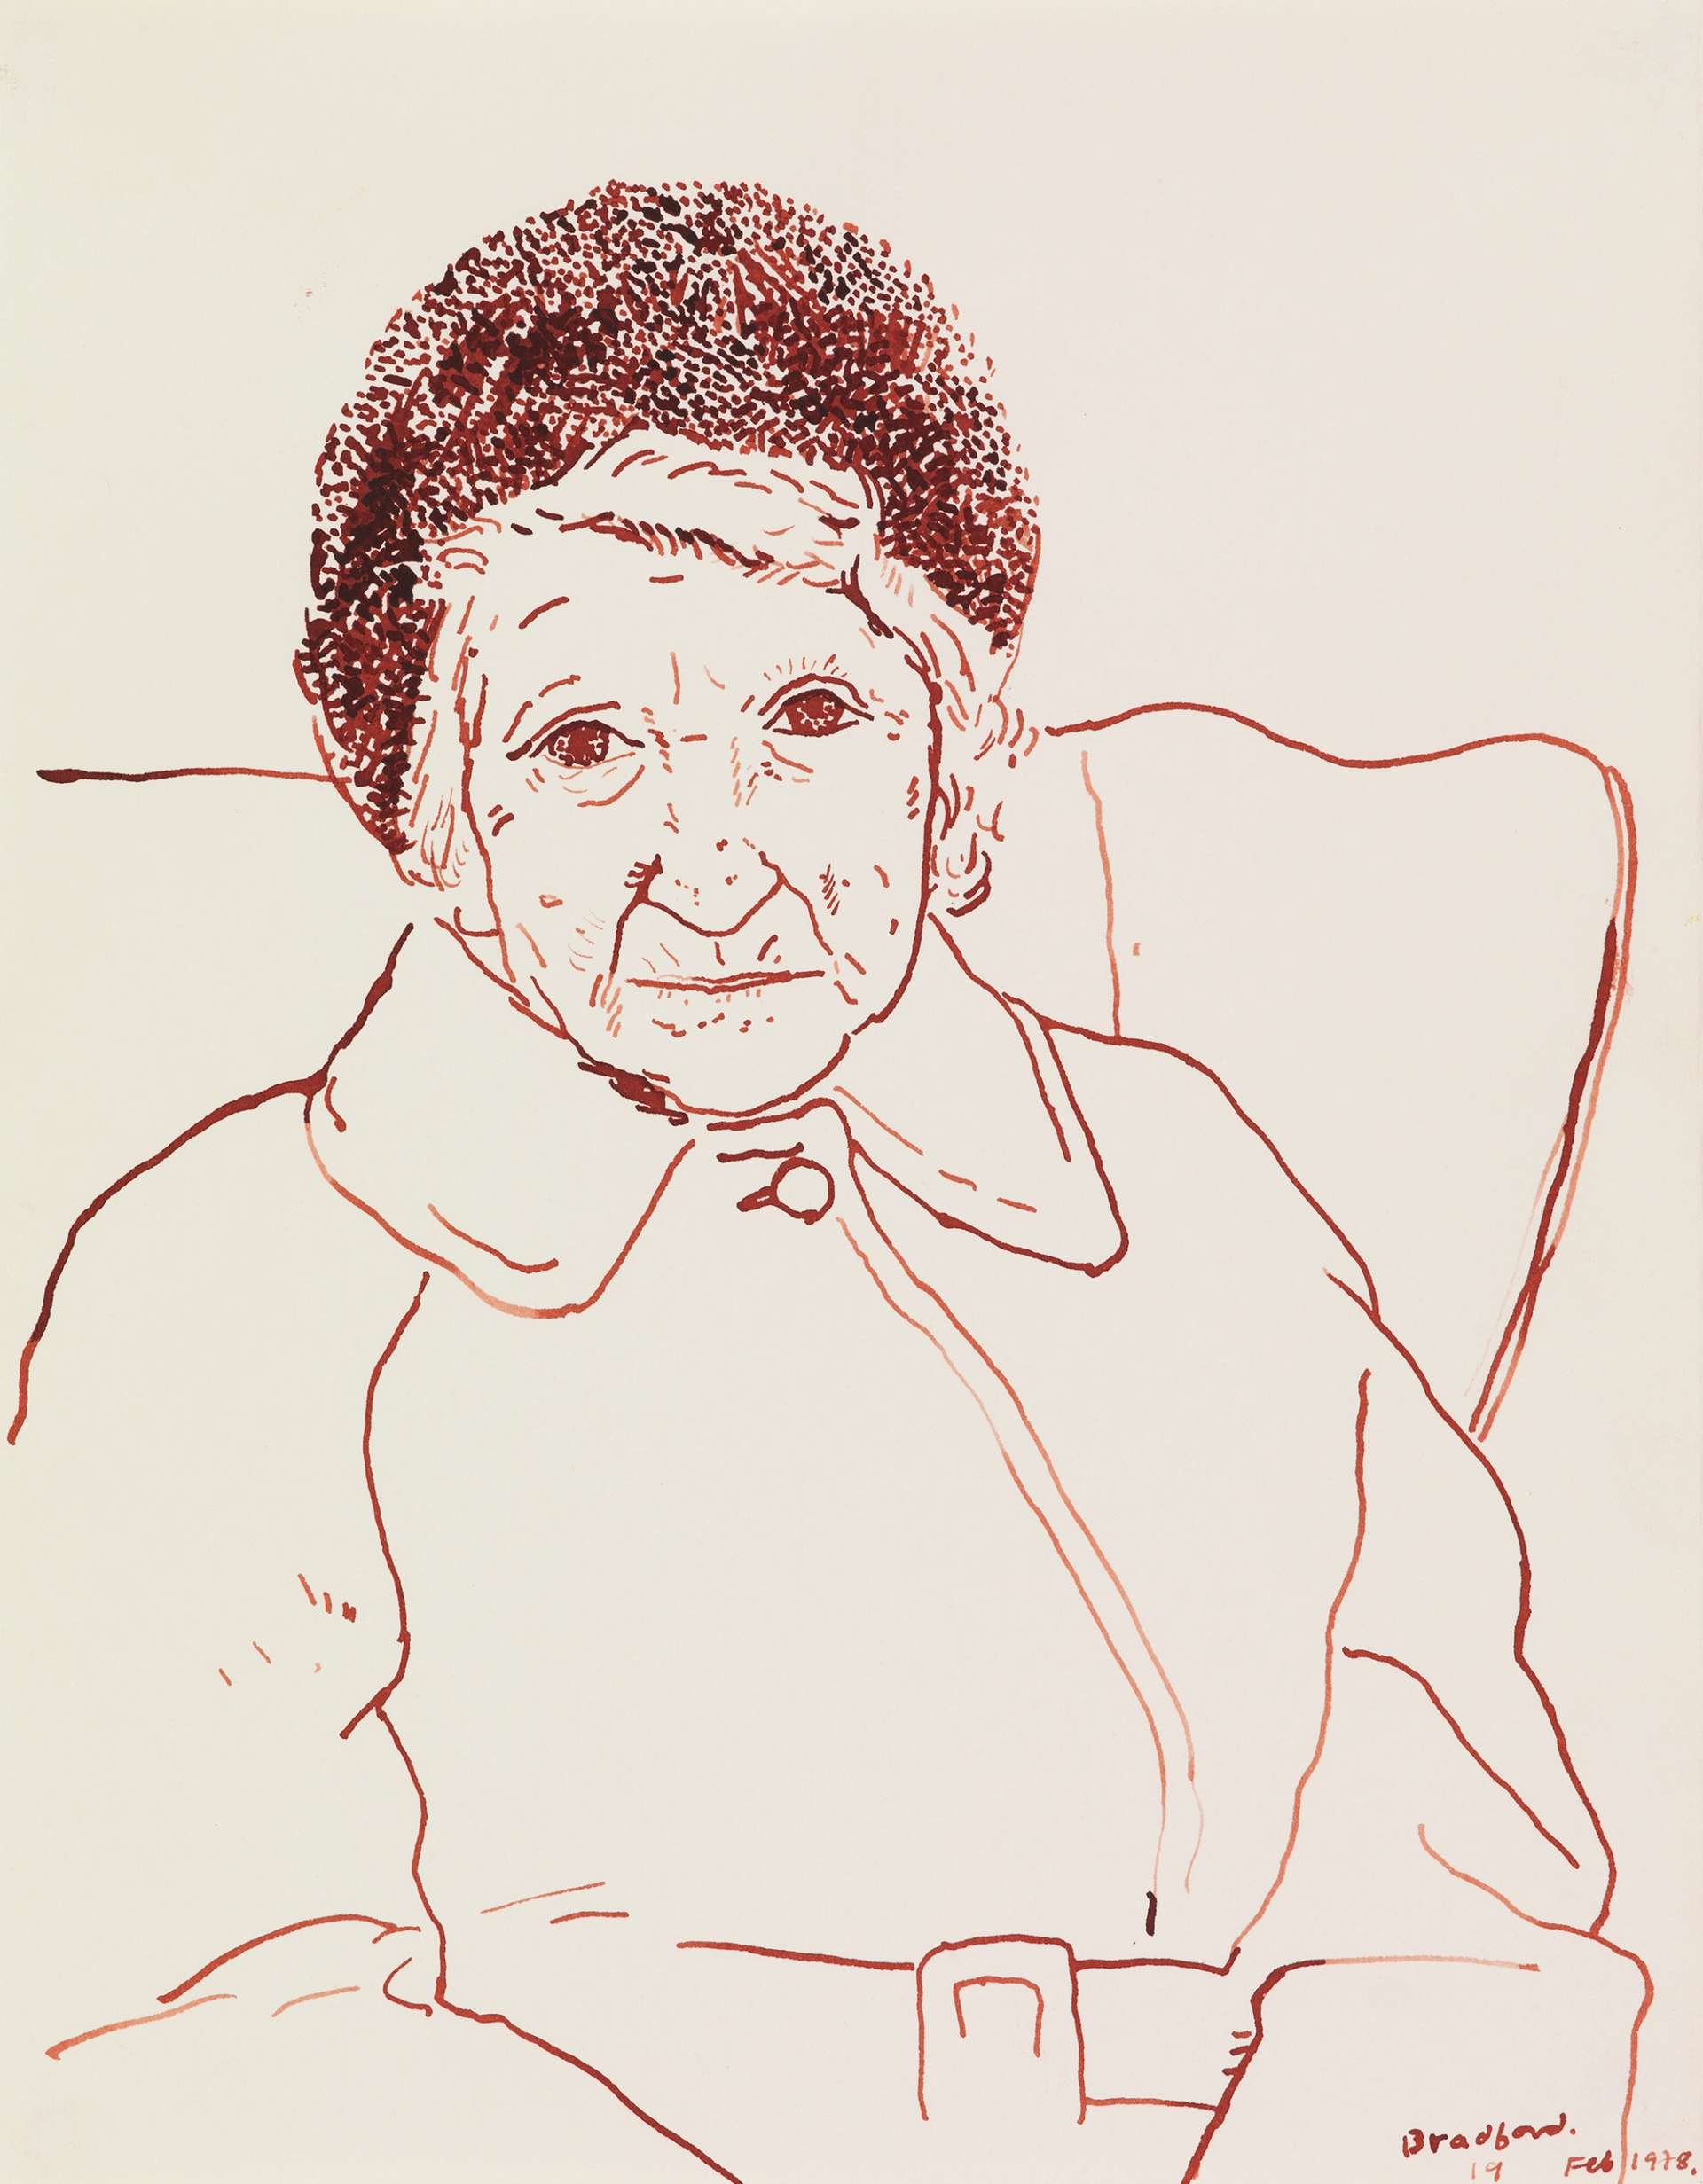 A sepia ink portrait of Laura Hockney by David Hockney, presenting the artist's mother in a coat and hat, gazing out to the viewer.